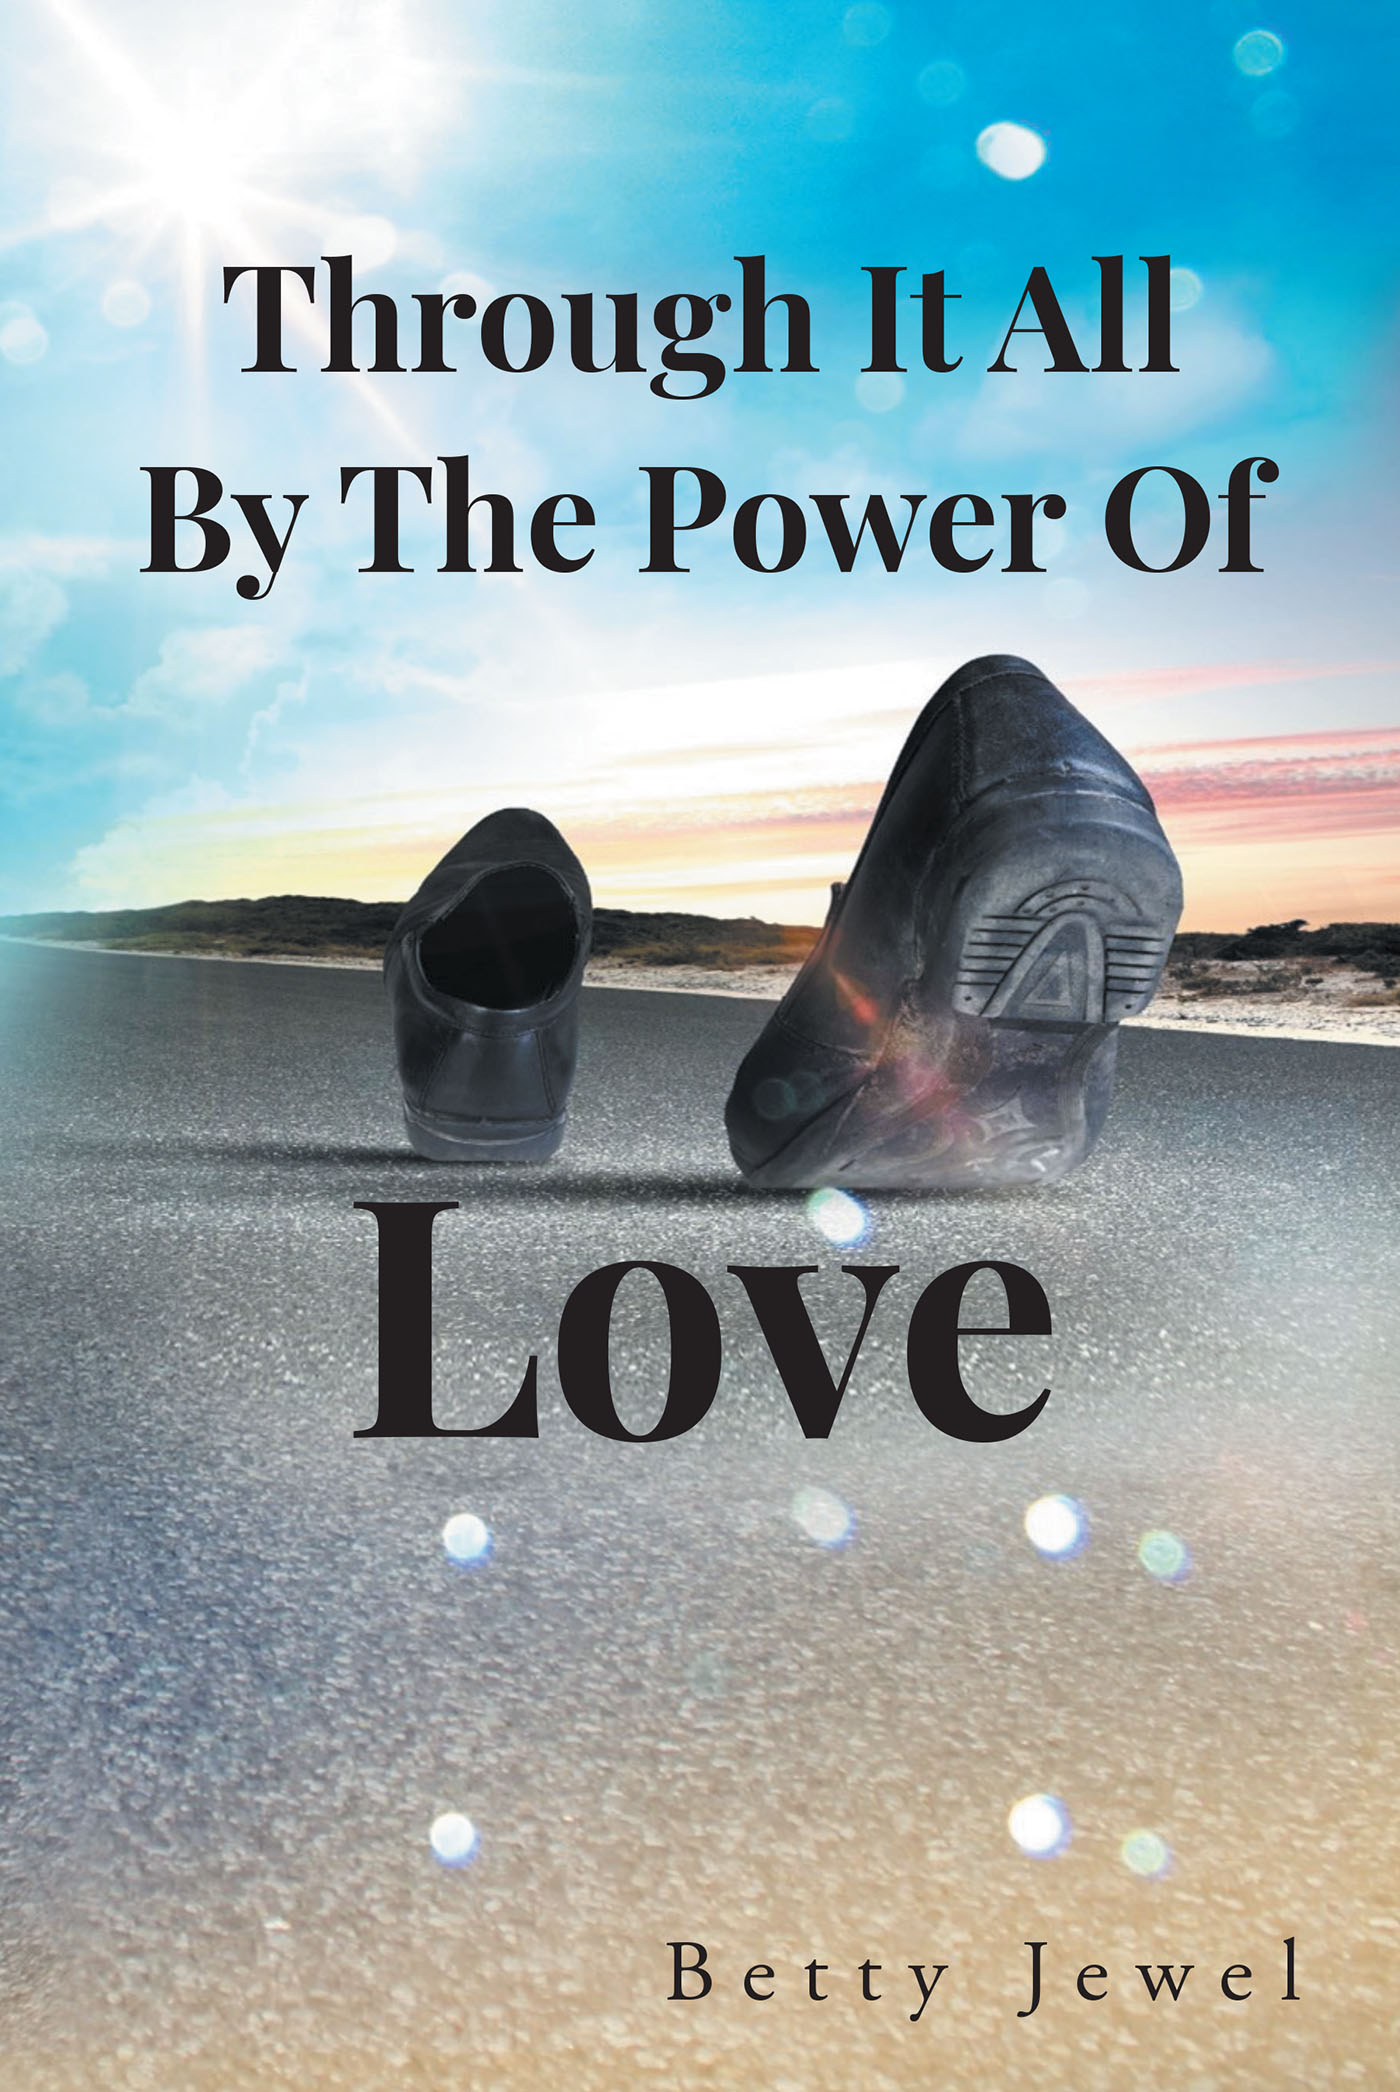 Betty Jewel's New Book 'Through It All By The Power Of Love' is a